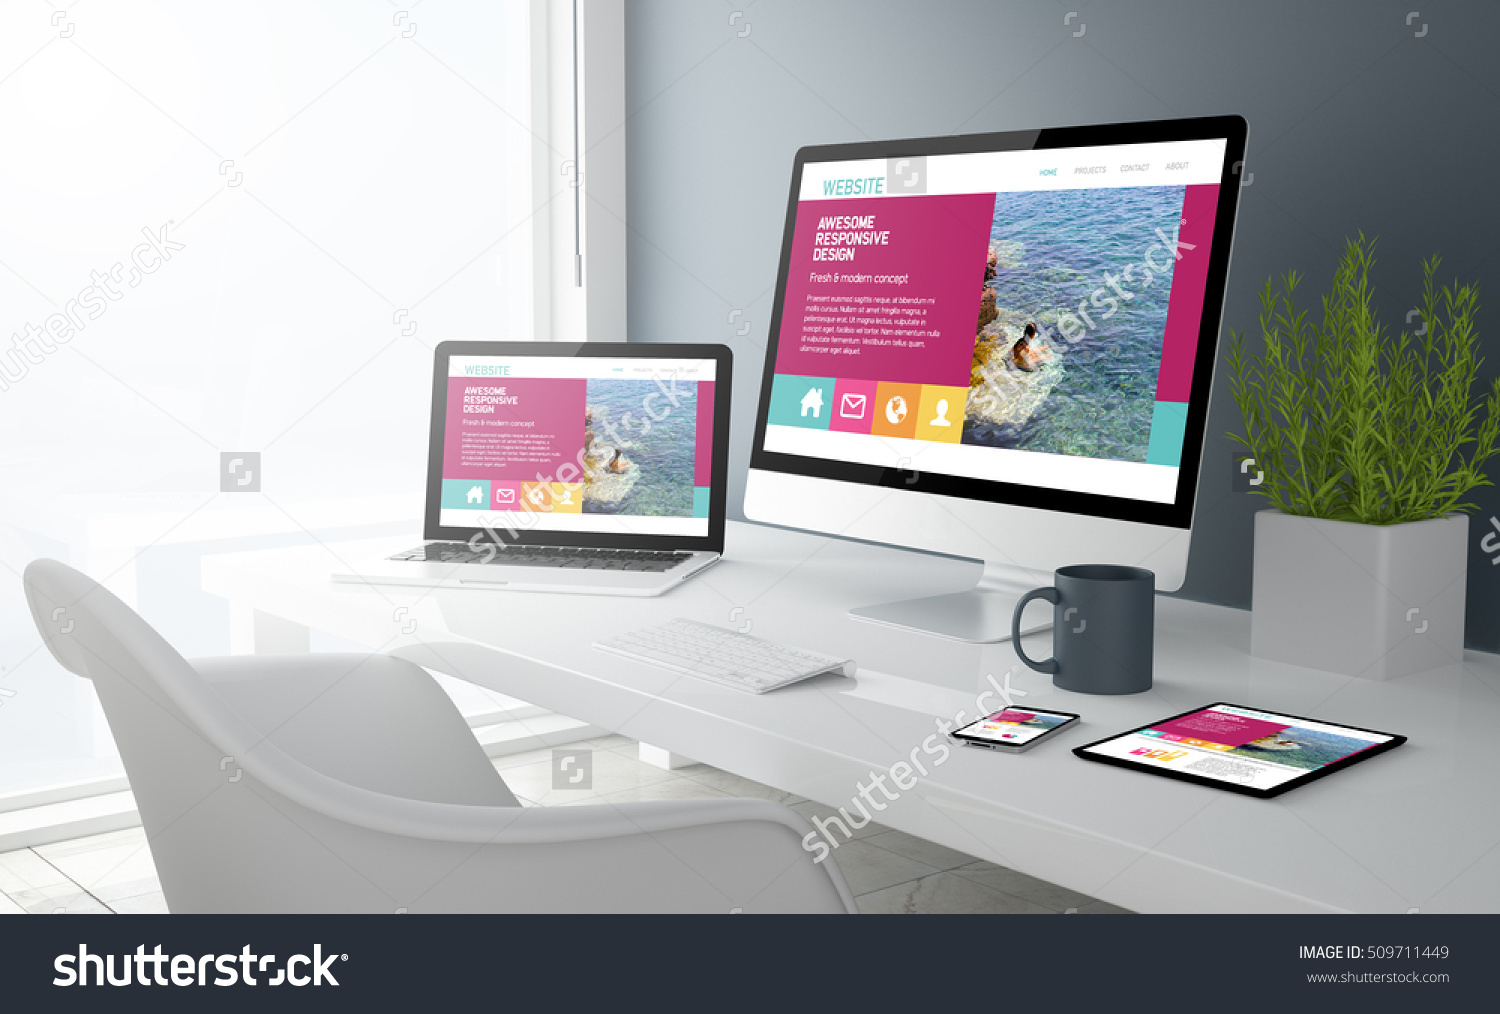 stock-photo--d-rendering-of-desktop-with-all-devices-showing-modern-design-website-all-screen-graphics-are-509711449